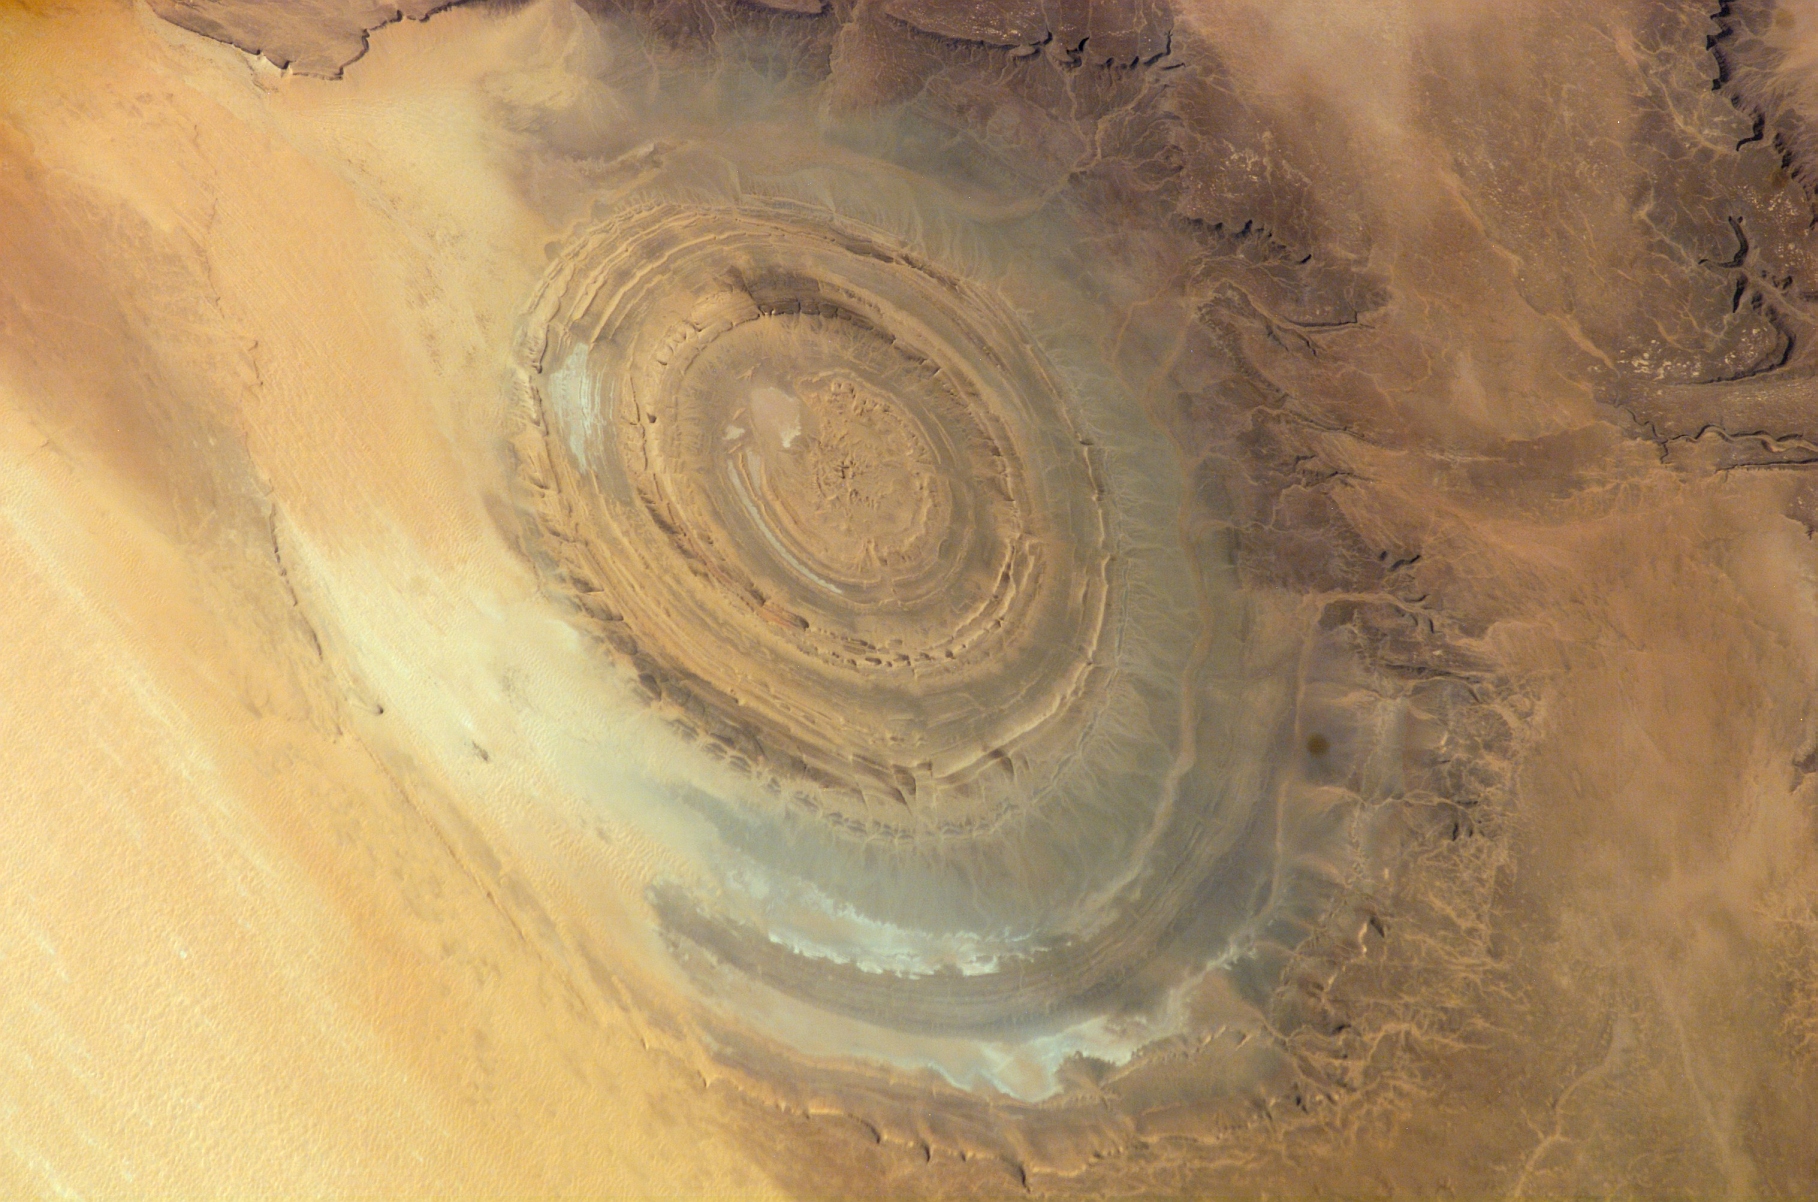 Mauritania: Richat Structure, in the Maur Adrar Desert, photographed